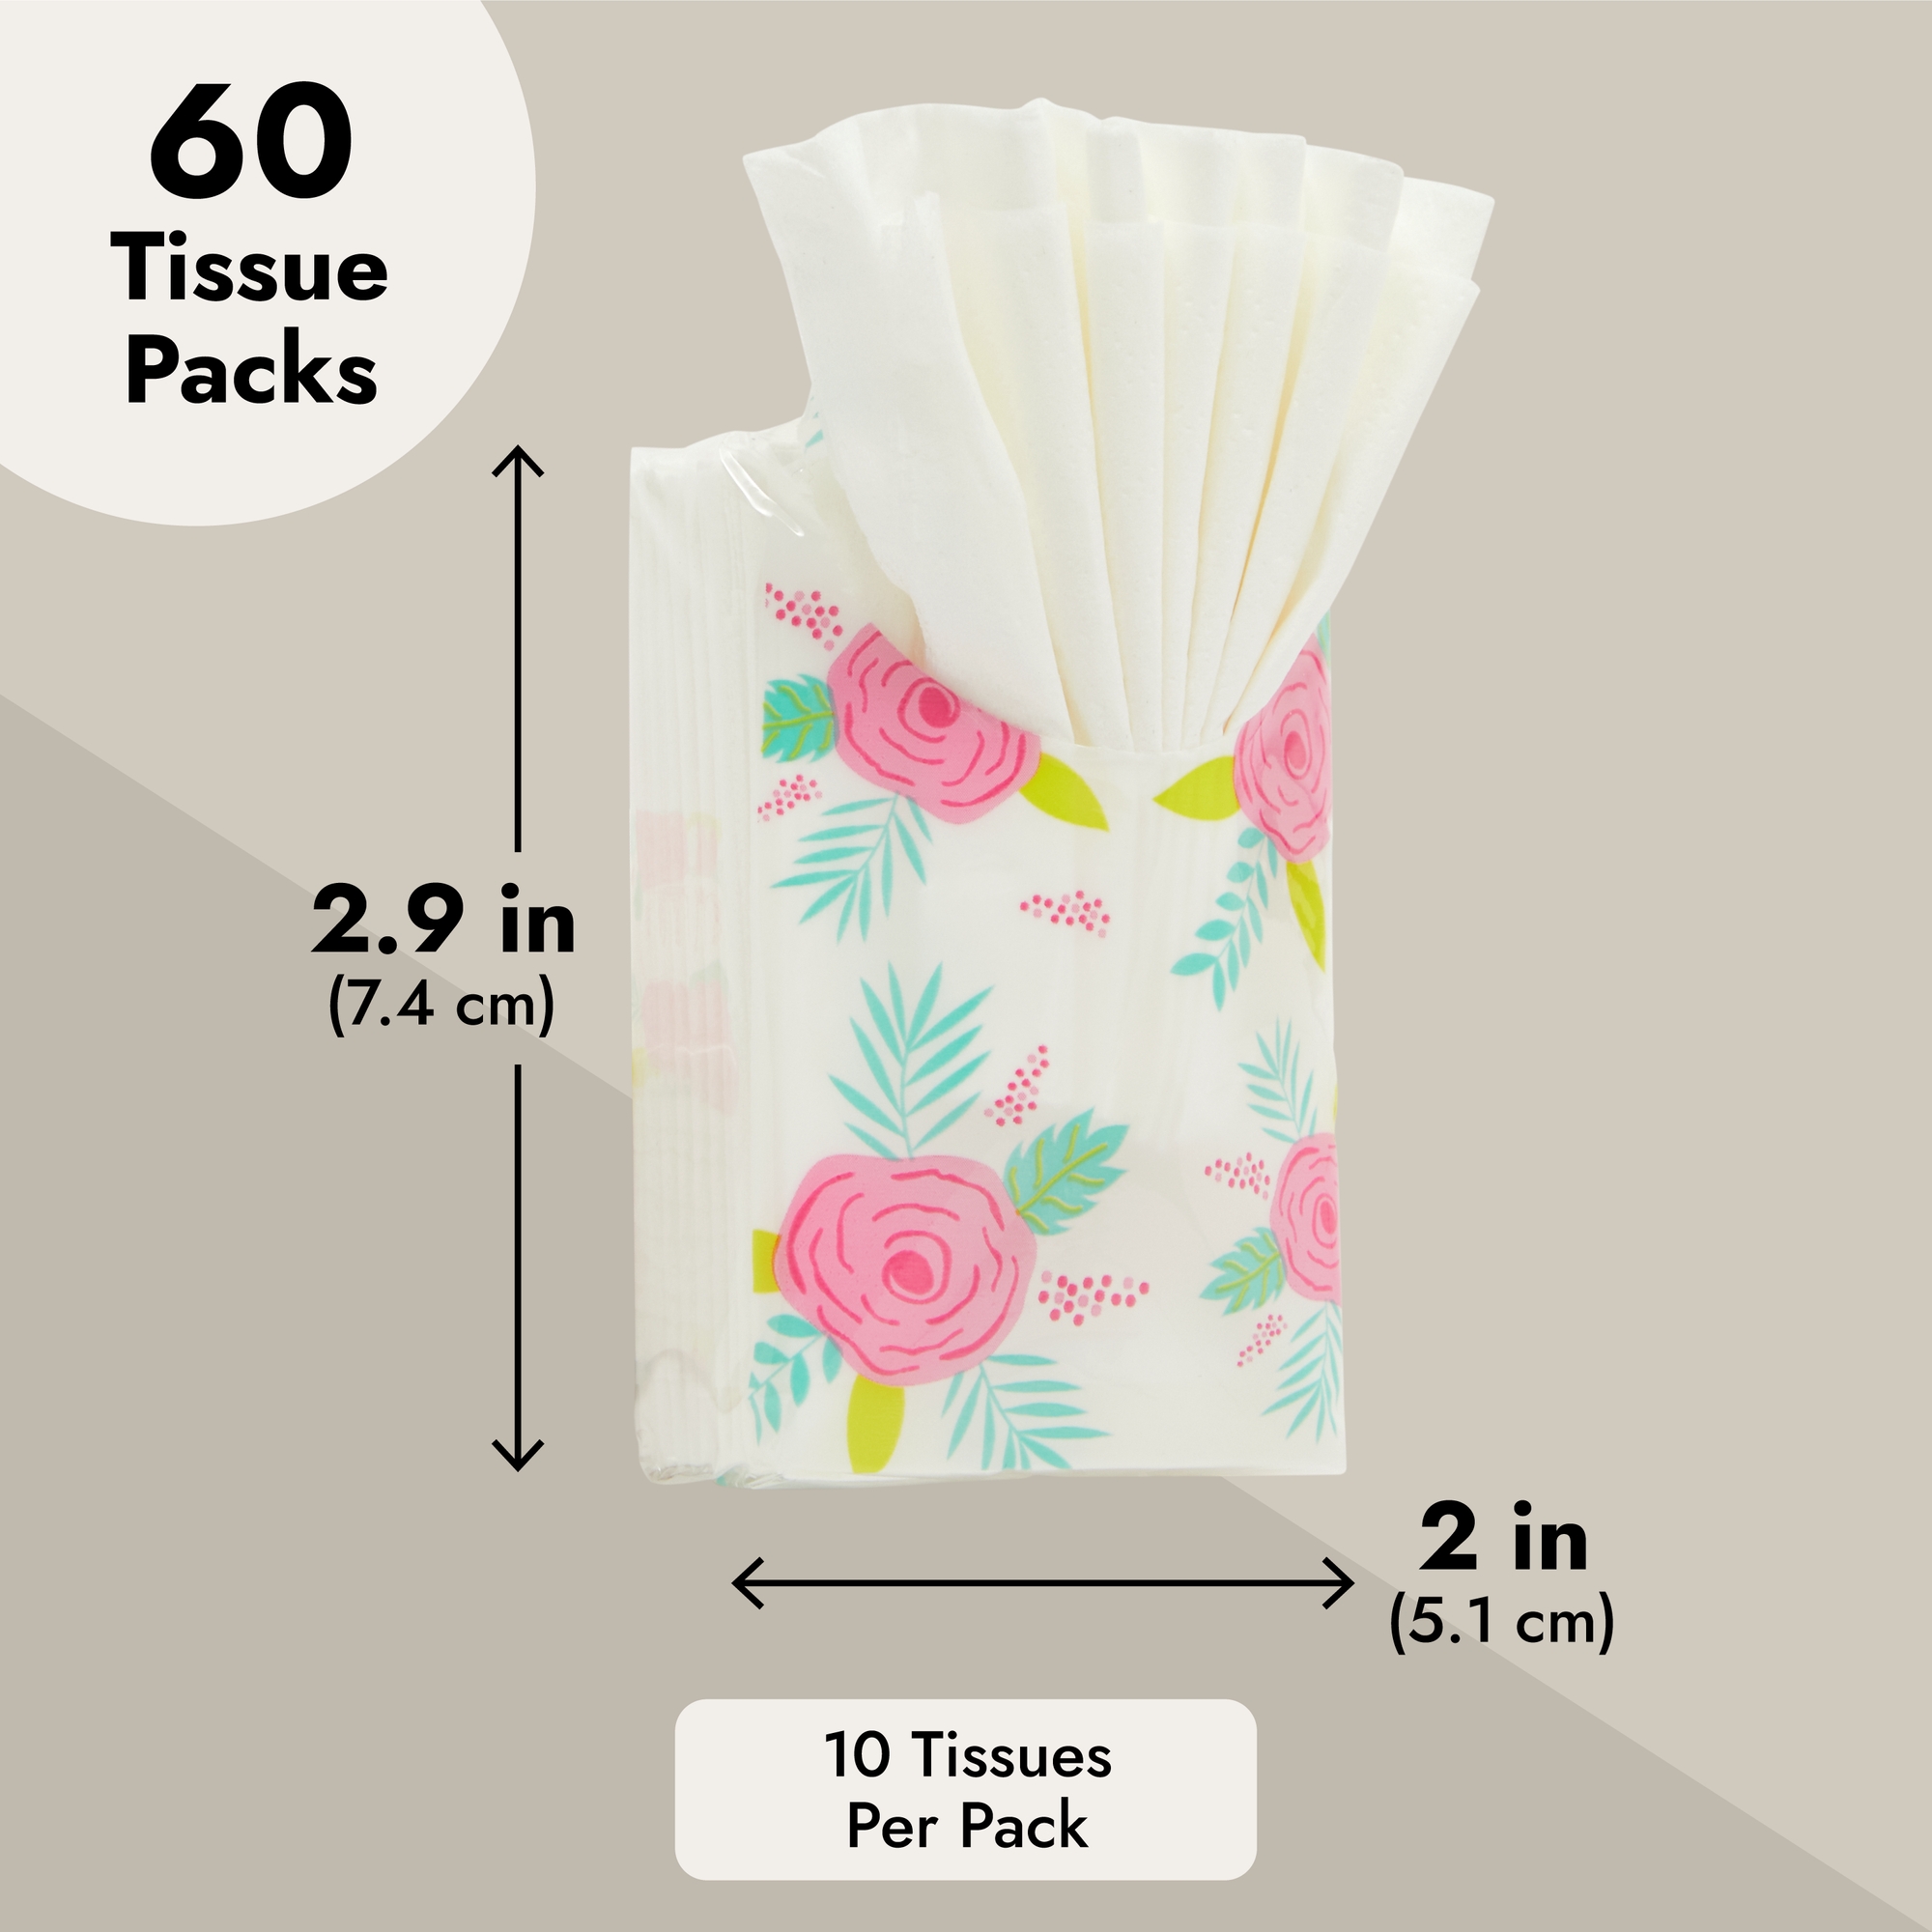 60-Pack Wedding Facial Tissue Souvenirs for Guests - Welcome Bag Party Favors and Bulk Pocket-Size Travel Packs - image 5 of 10